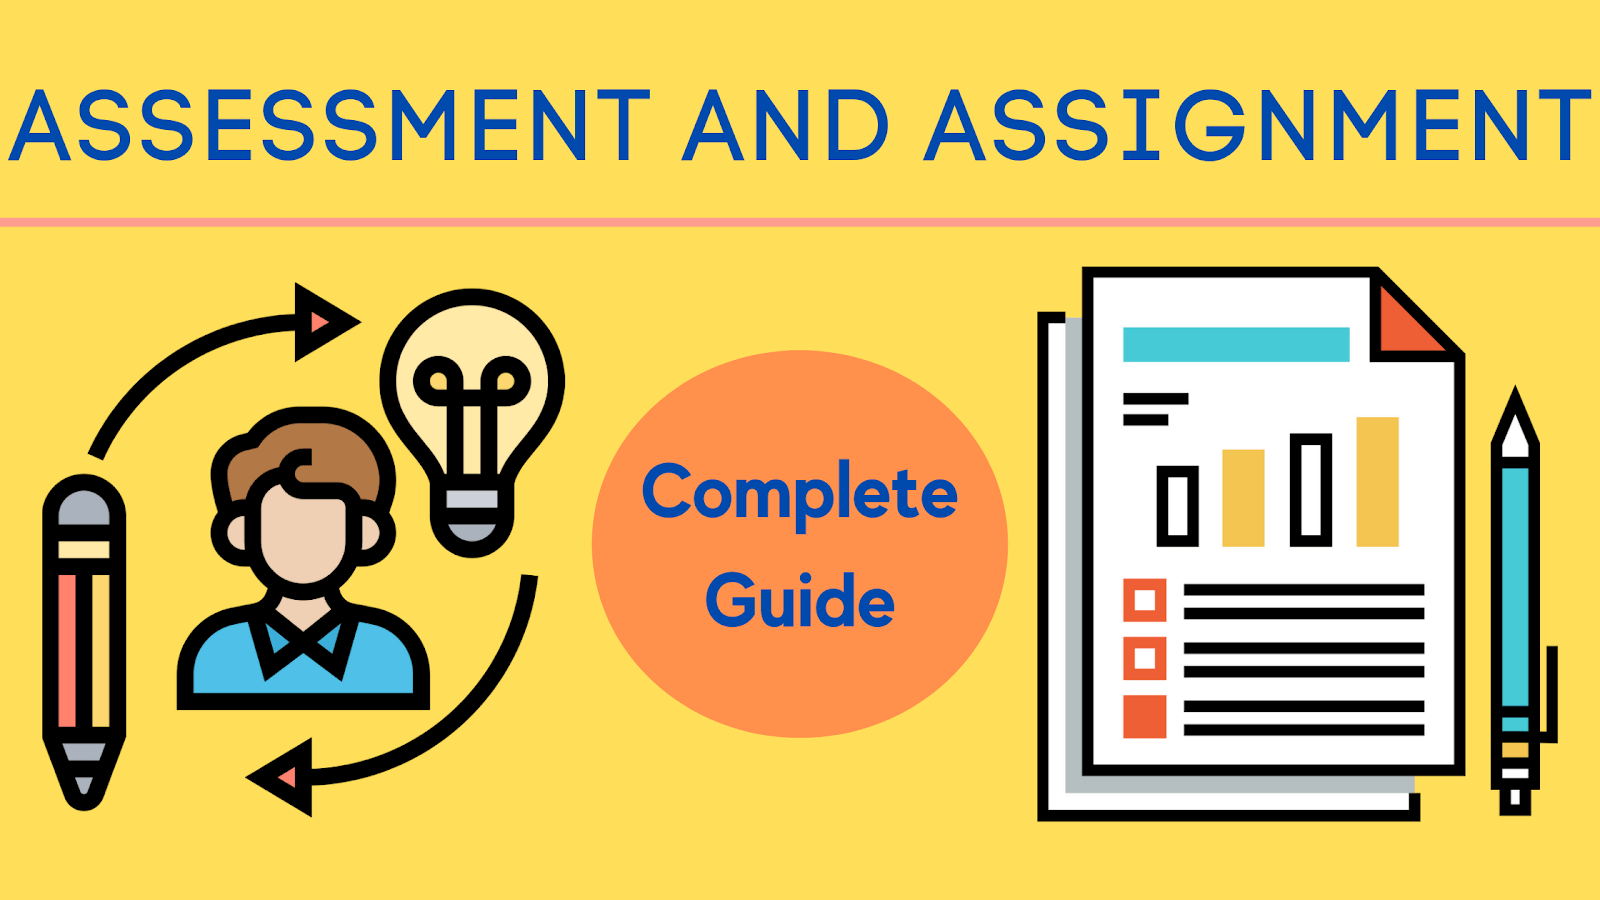 What is the difference between Assessment and assignment